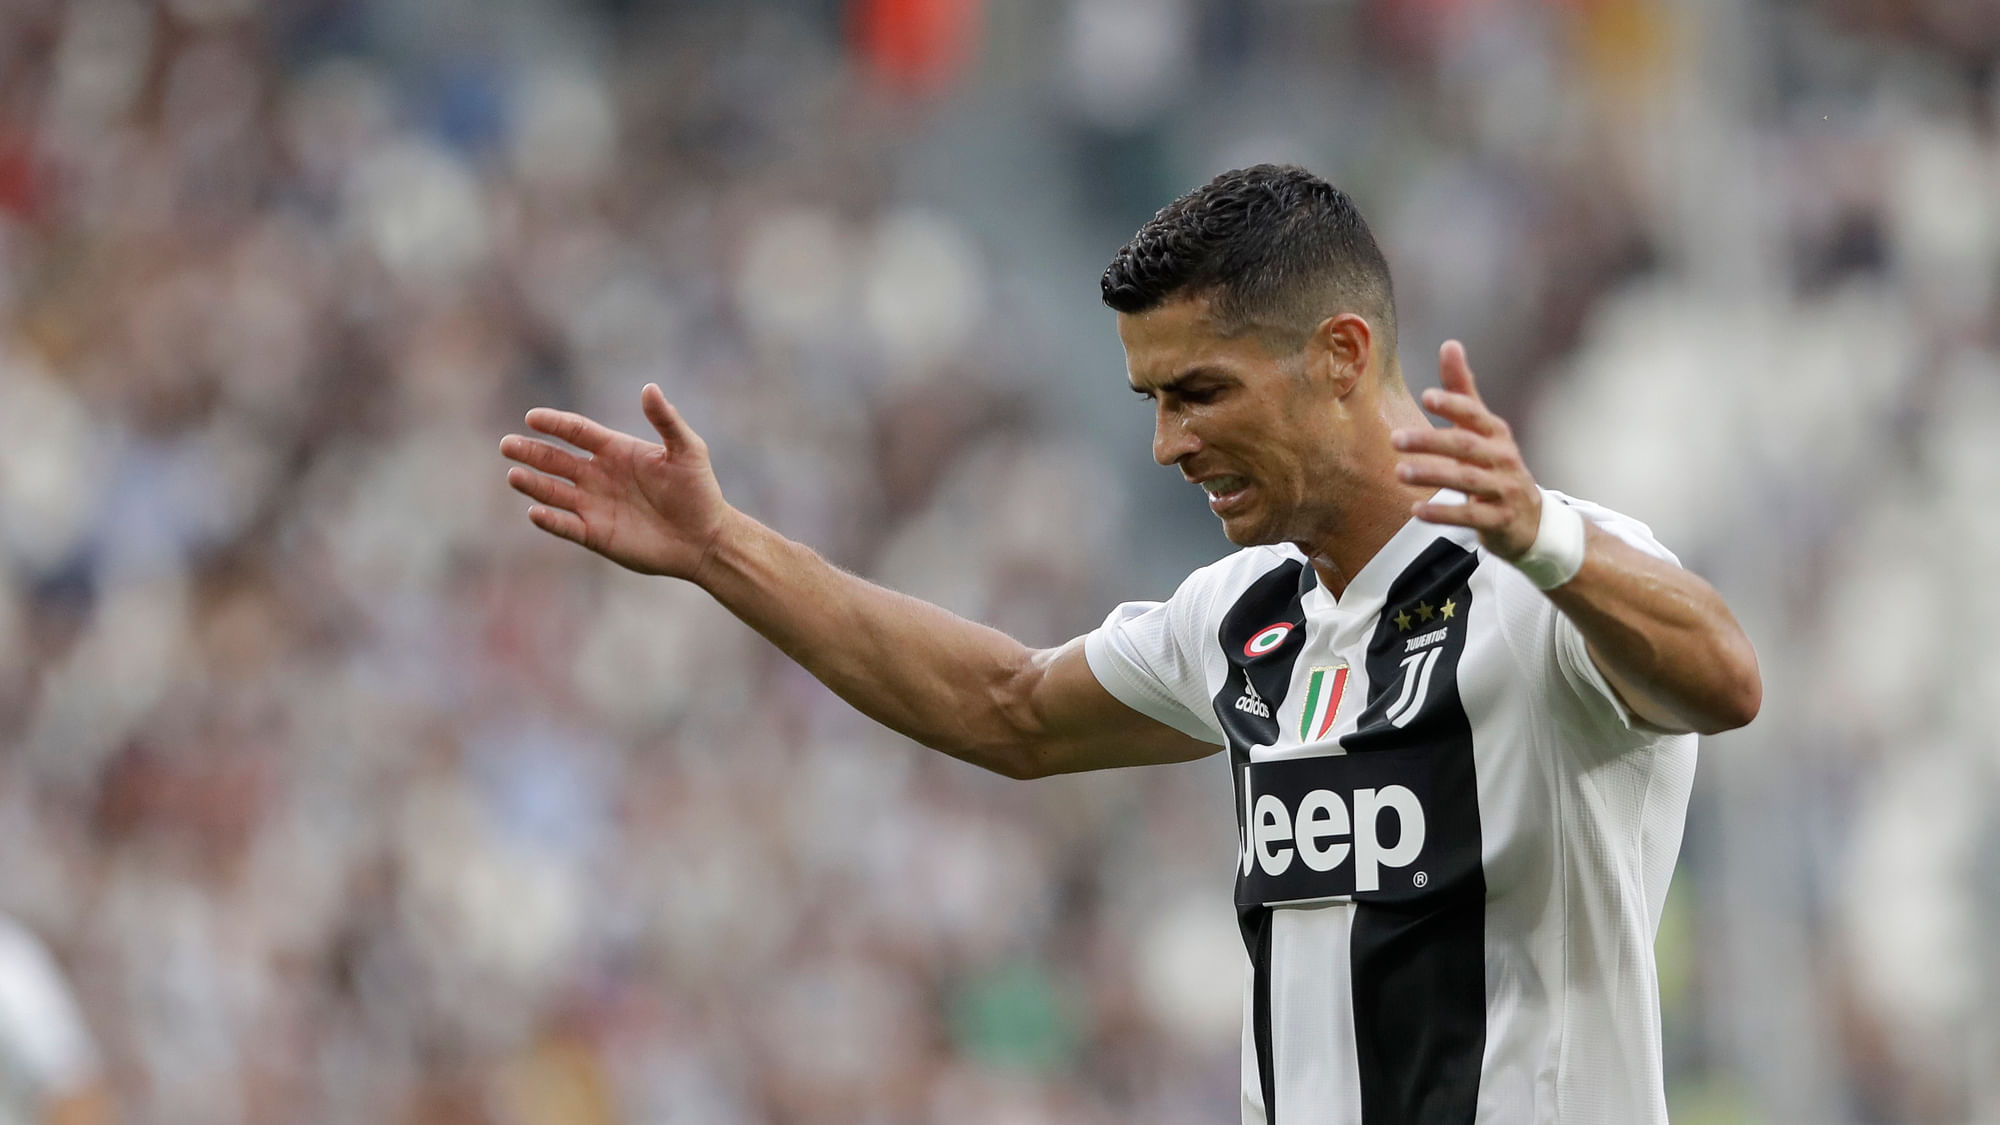 Juventus’ Cristiano Ronaldo reacts after missing a chance on goal during the Serie A soccer match between Juventus and Lazio at the Allianz Stadium in Turin, Italy.